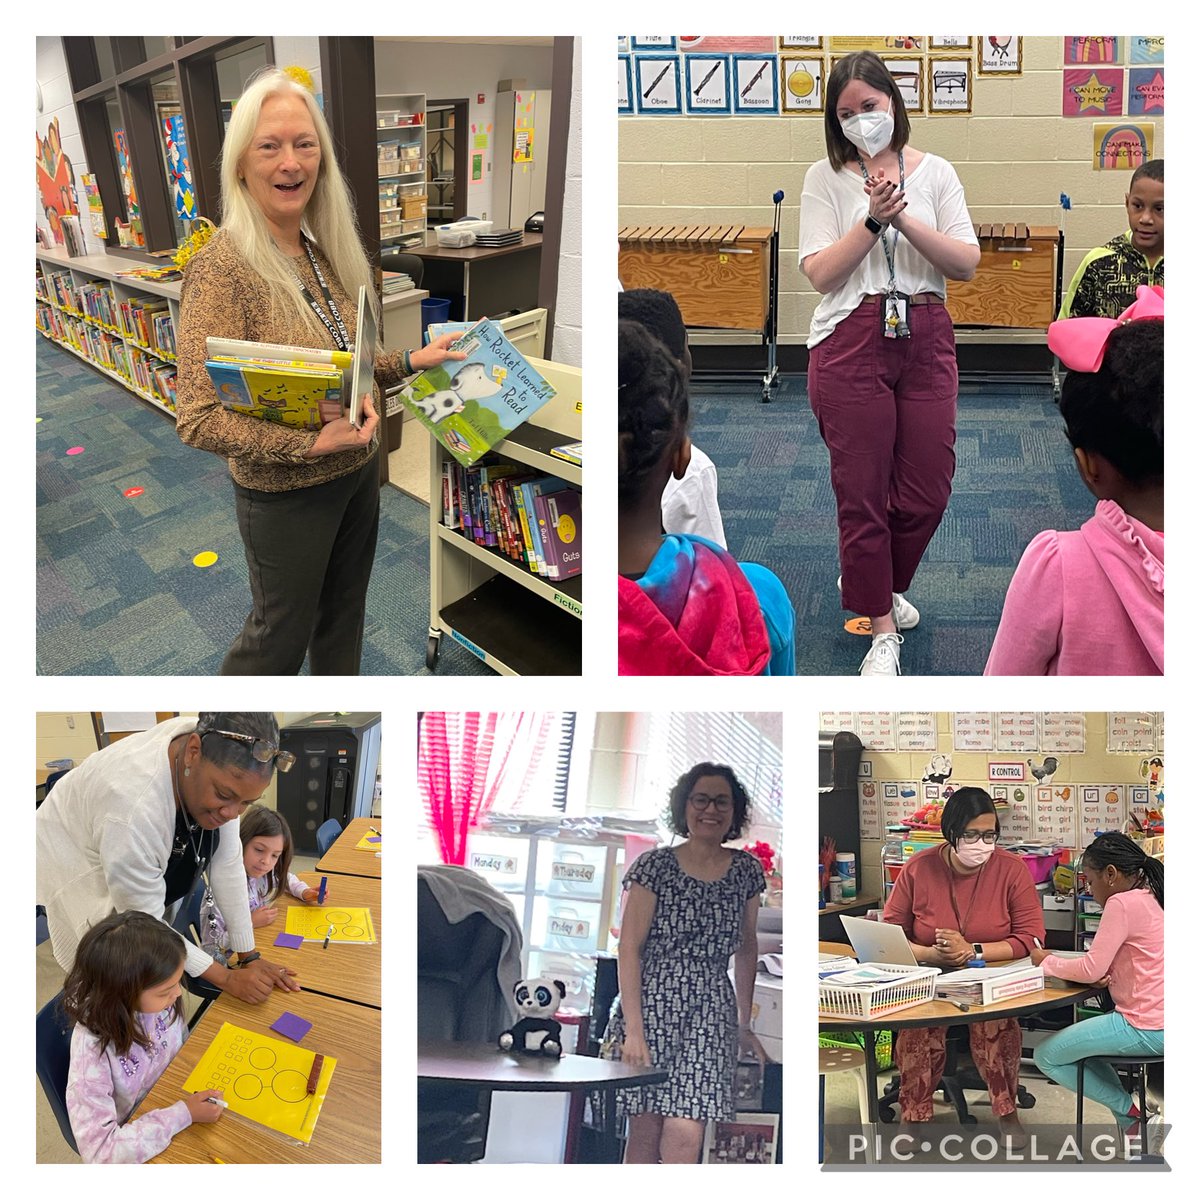 Honoring our phenomenal women in our building for International Women’s Day. Thank You for spreading love to our Ss. #HuskyChat #differencemakers ⁦@HendricksEsGA⁩